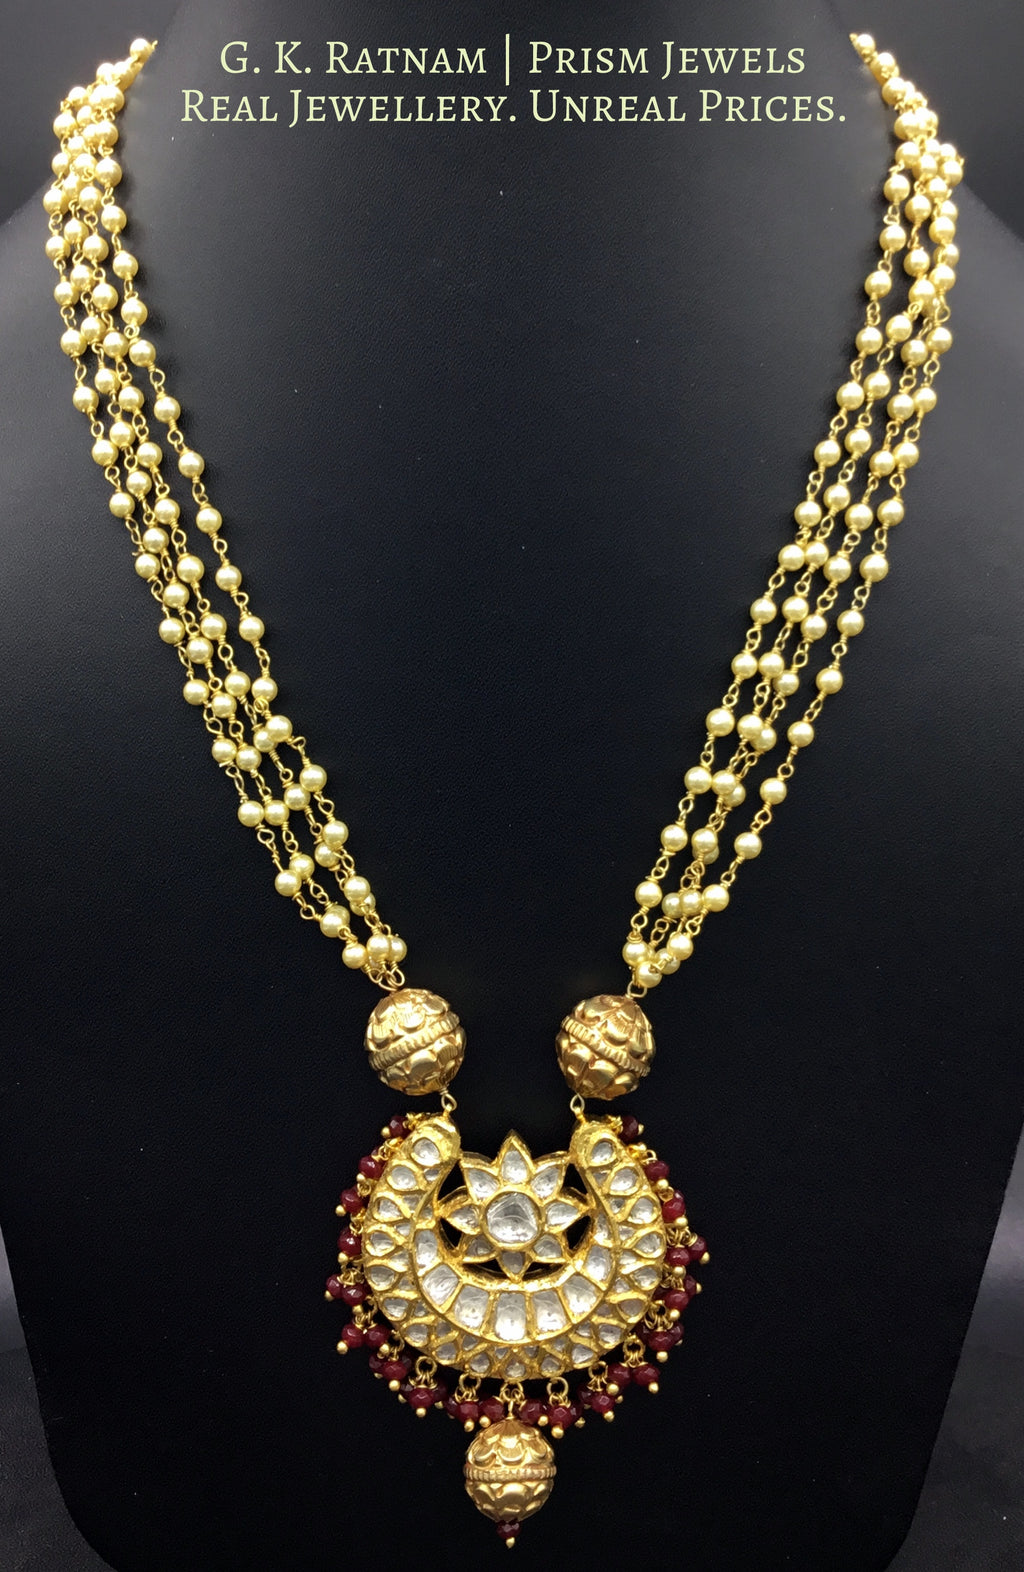 18k Gold and Diamond Polki Chand Pendant with Pearl Chains and Ruby Beads - G. K. Ratnam